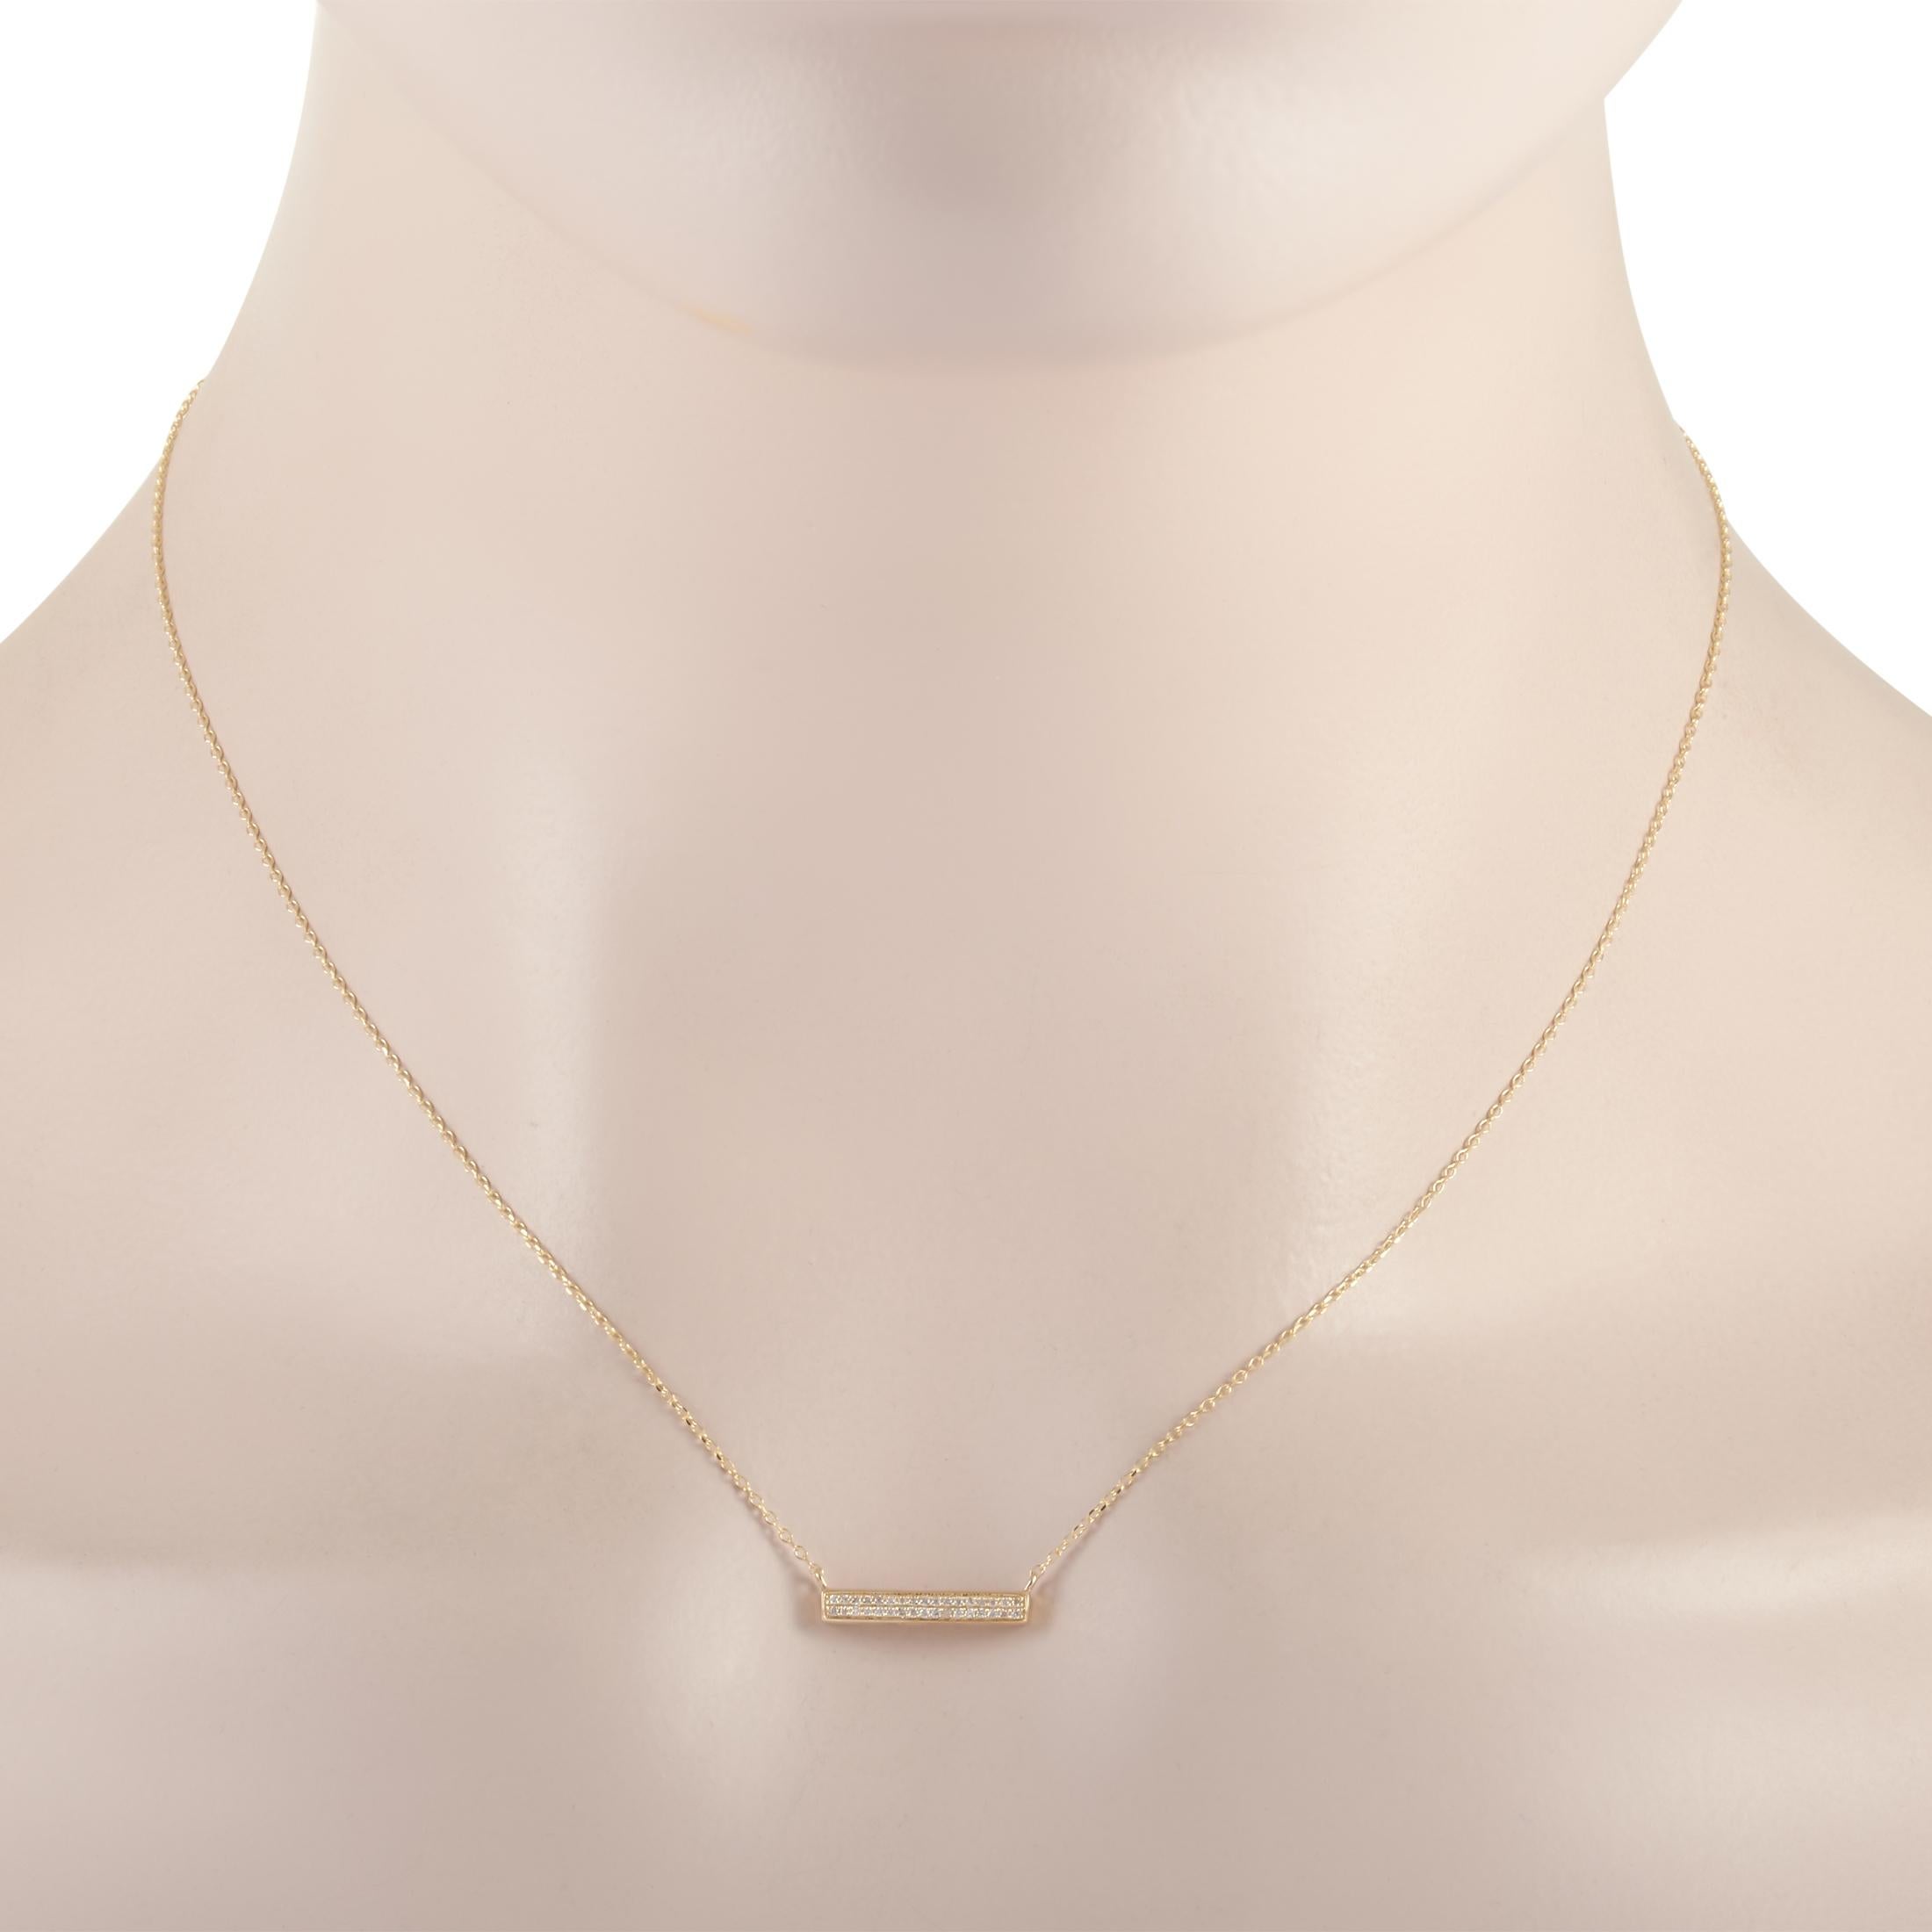 This LB Exclusive necklace is made of 14K yellow gold and embellished with diamonds that amount to 0.15 carats. The necklace weighs 1.5 grams and boasts a 15” chain and a pendant that measures 0.13” in length and 0.63” in width.
 
 Offered in